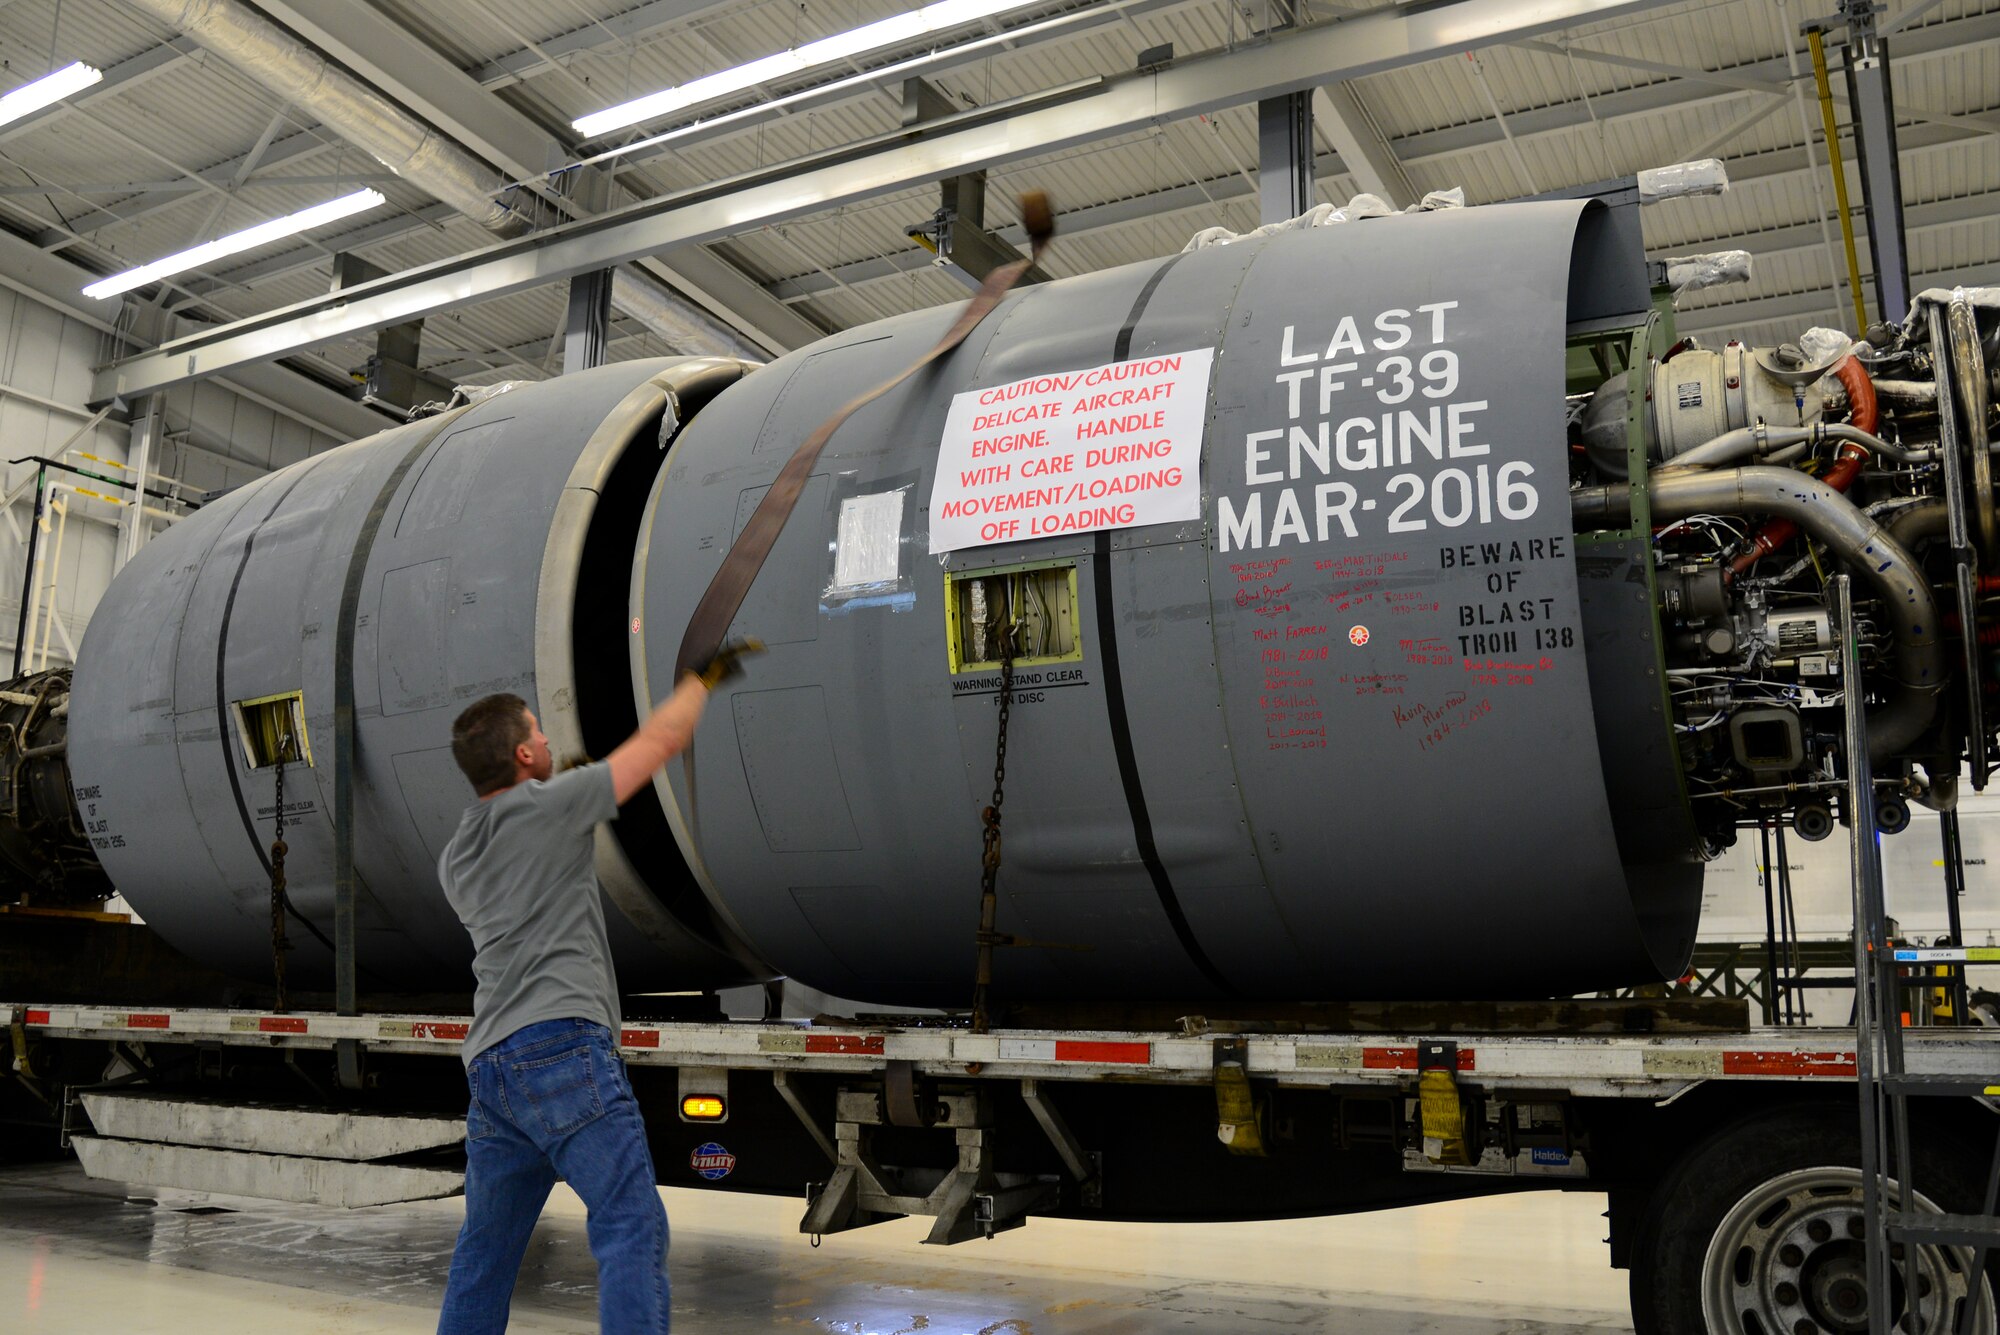 Wesley Currin, Triple J Trucking driver, throws a tie-down strap over a General Electric TF-39 turbofan engine Feb. 16, 2018, at Dover Air Force Base, Del. The North Carolina native drove the Air Force’s last functional TF-39 engine to Monroe, N.C., where it was purchased by a metals reclamation company. (U.S. Air Force photo by Staff Sgt. Aaron J. Jenne)